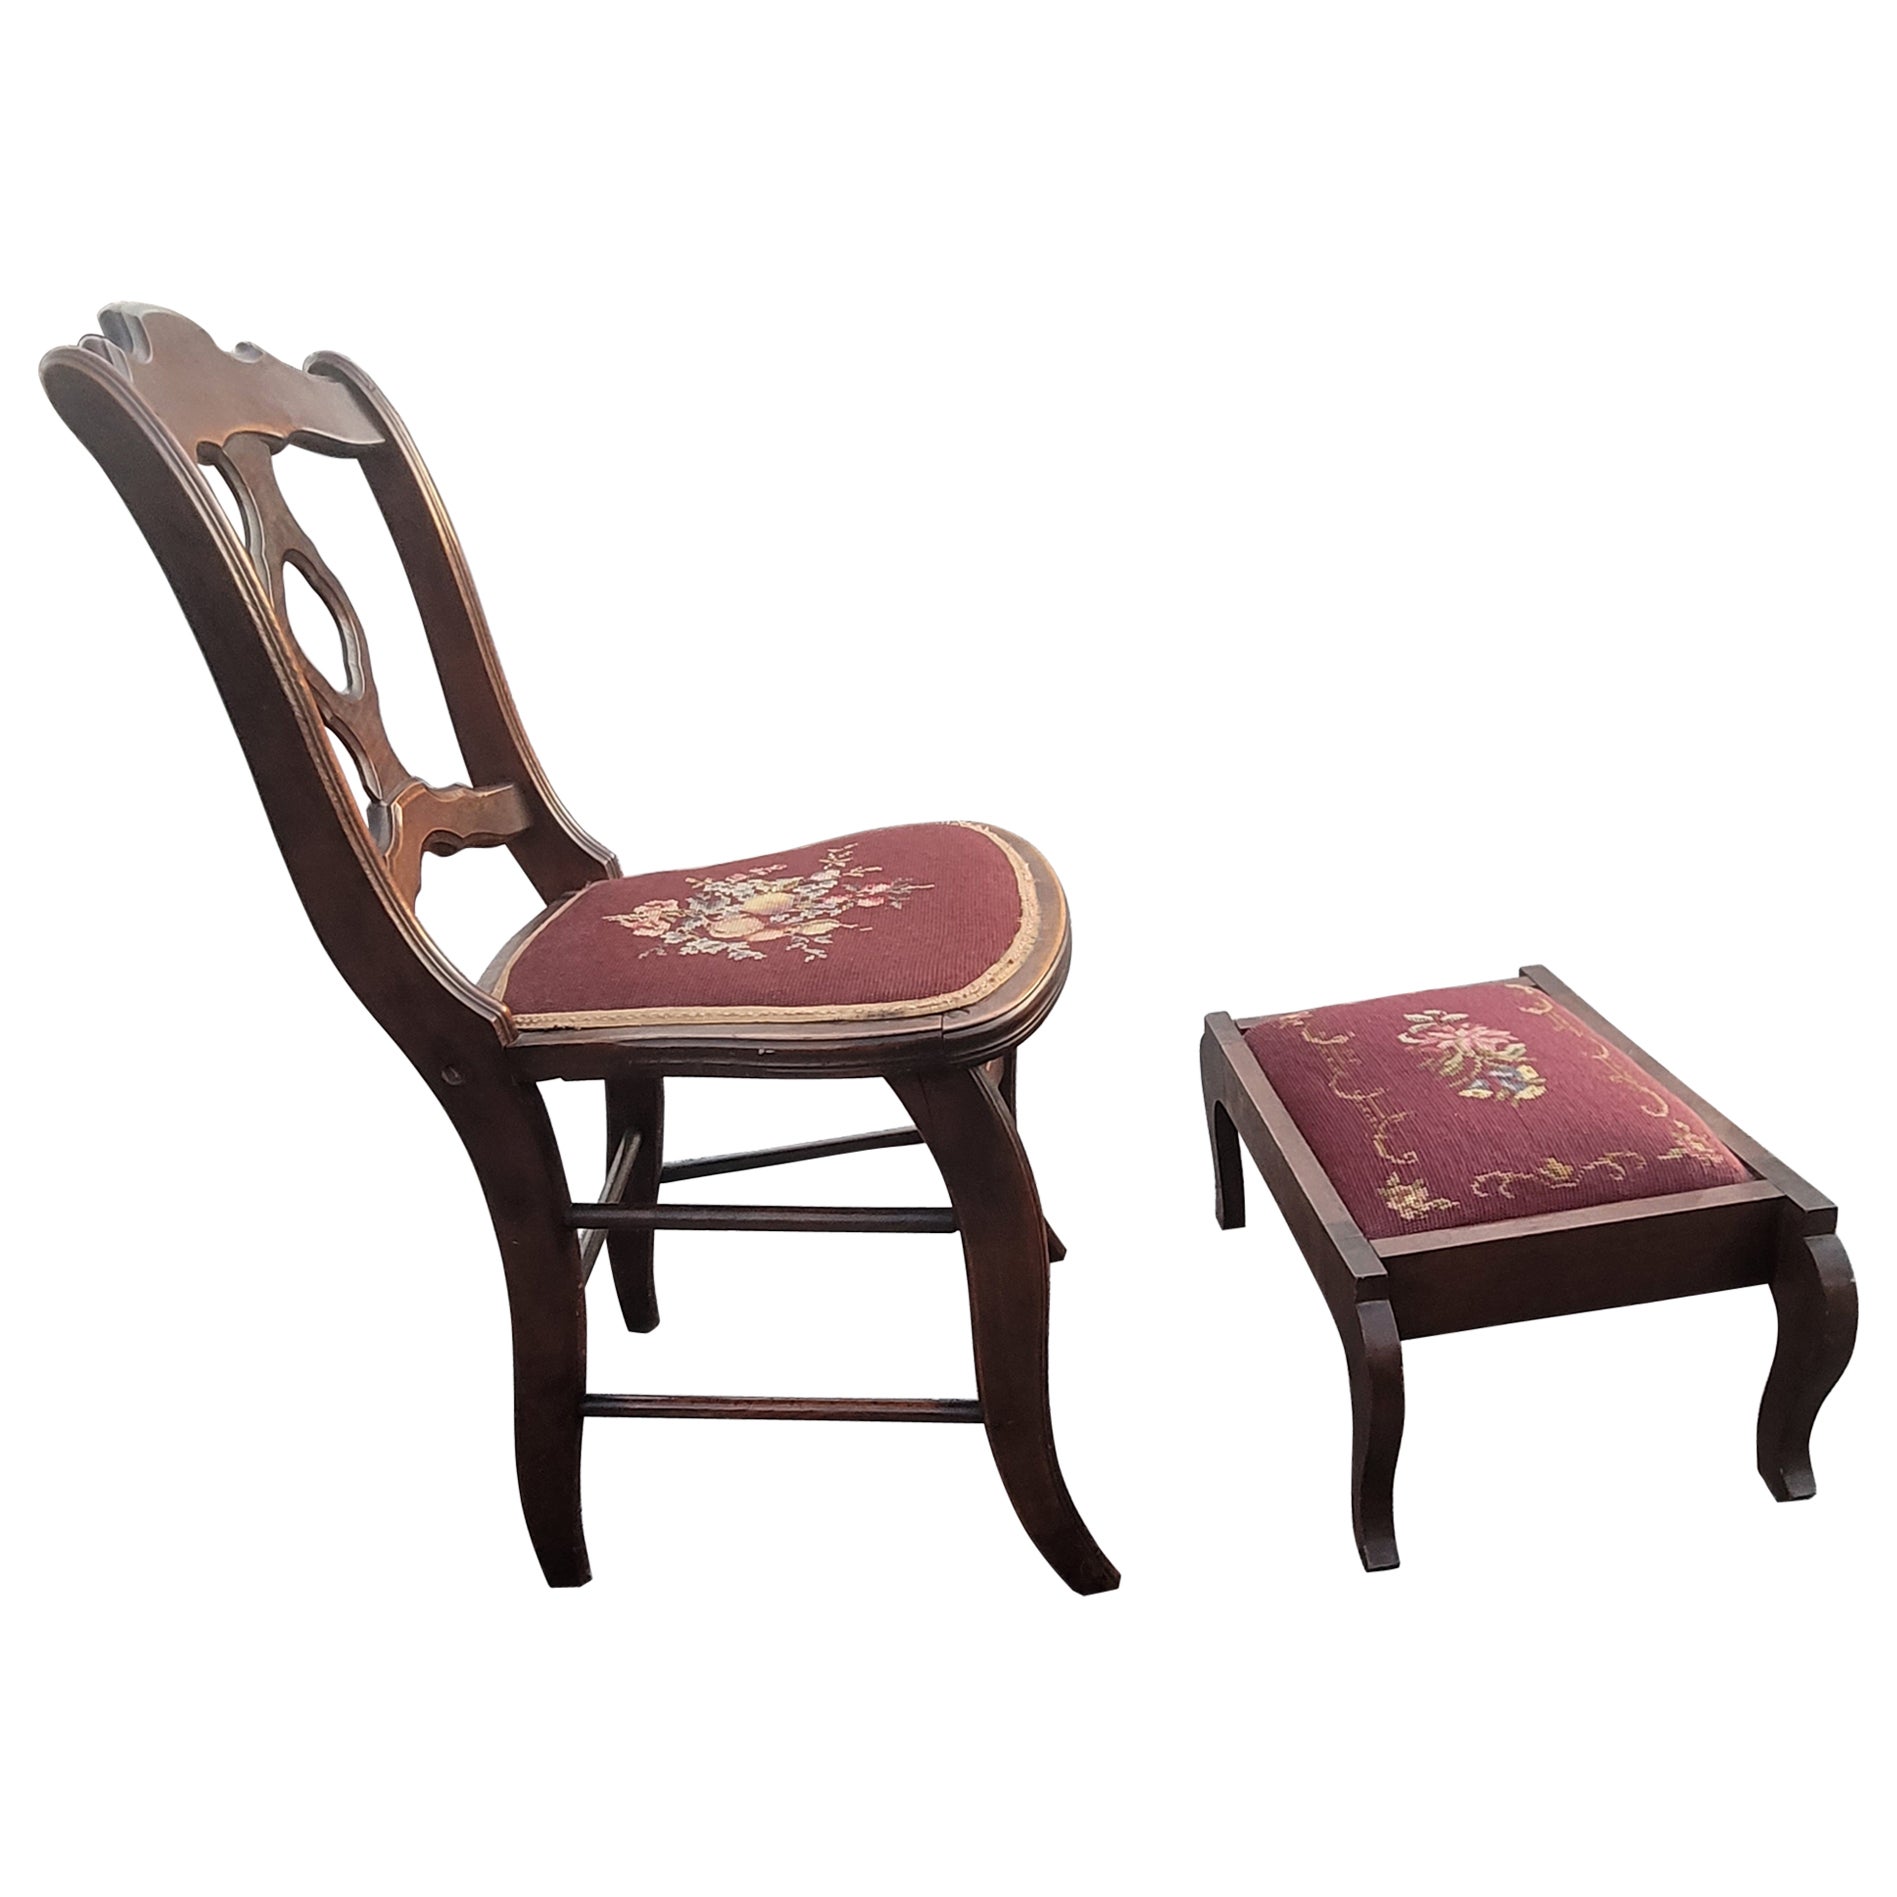 Late 19th Century Mahogany and Needlepoint Upholstered Chair with Footstool For Sale